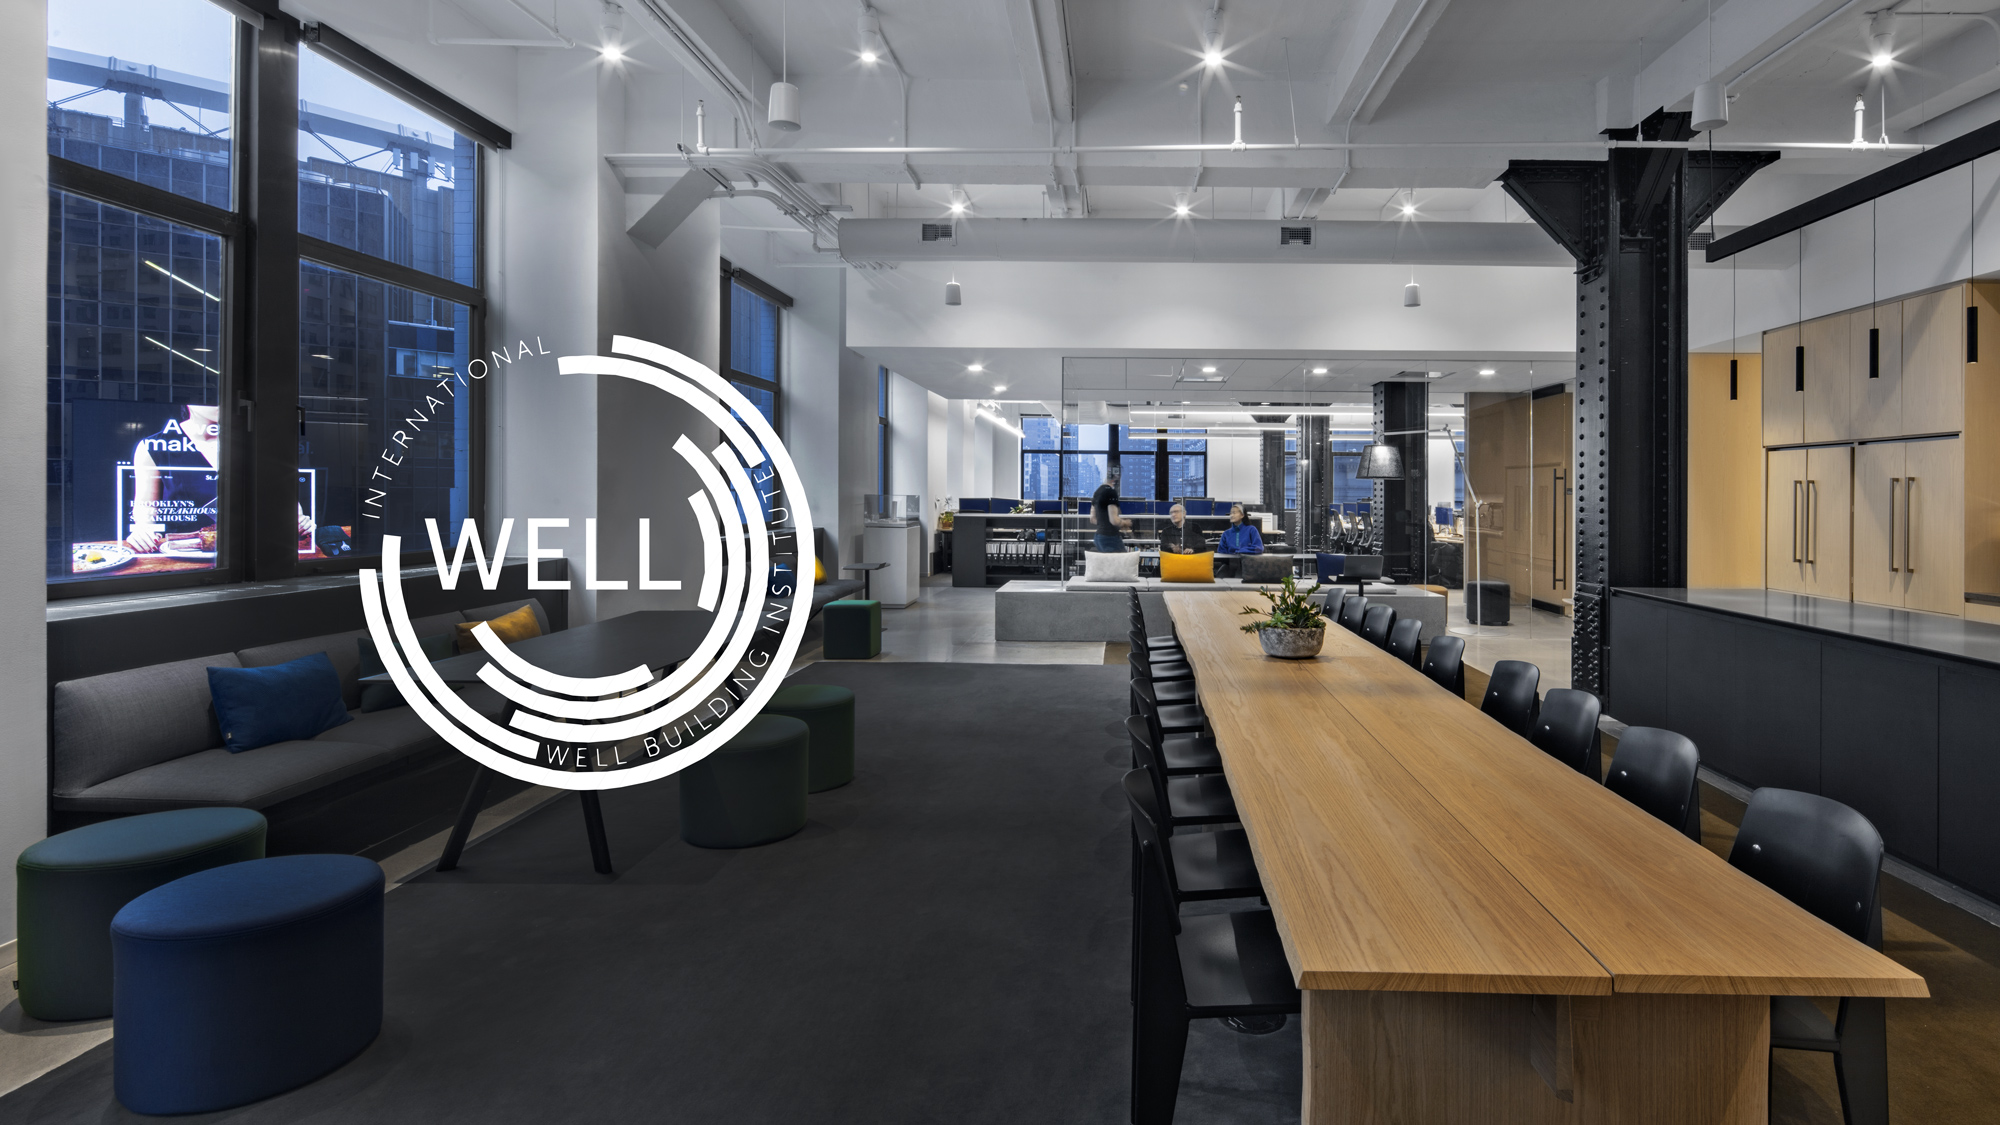 A modern office interior with industrial design elements, a large wooden table, black chairs, and a seating area with a logo of the International WELL Building Institute overlaid on the image.